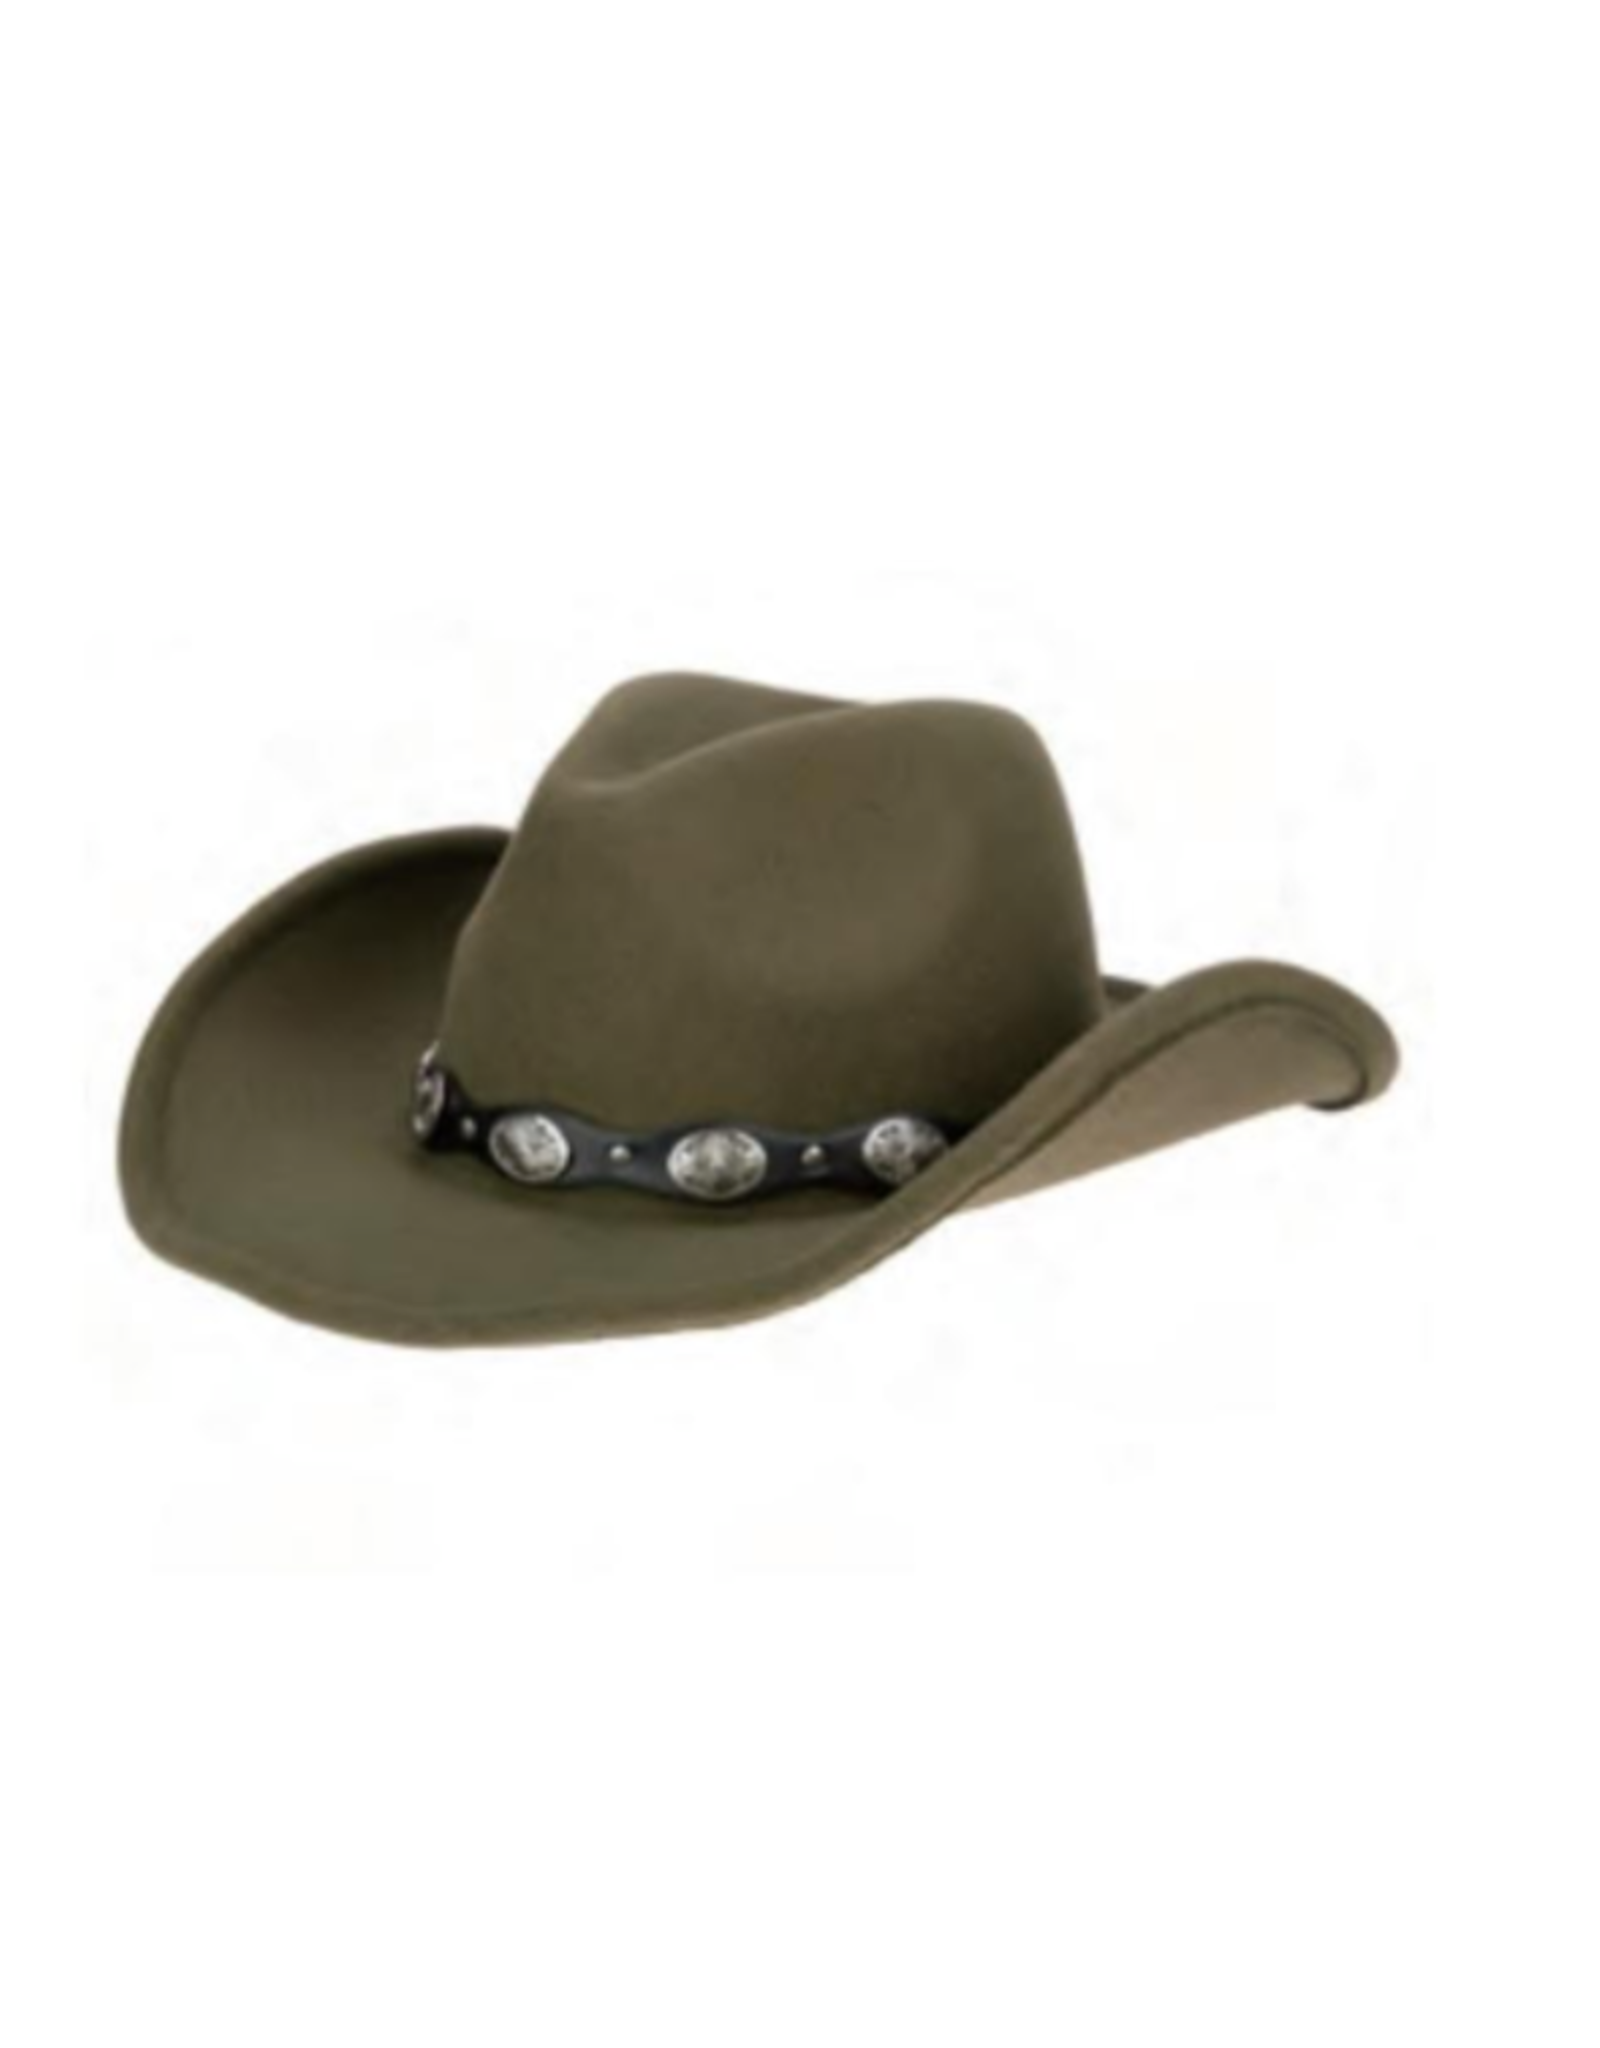 HAT-WESTERN CATTLEMAN W/CONCHES OLIVE